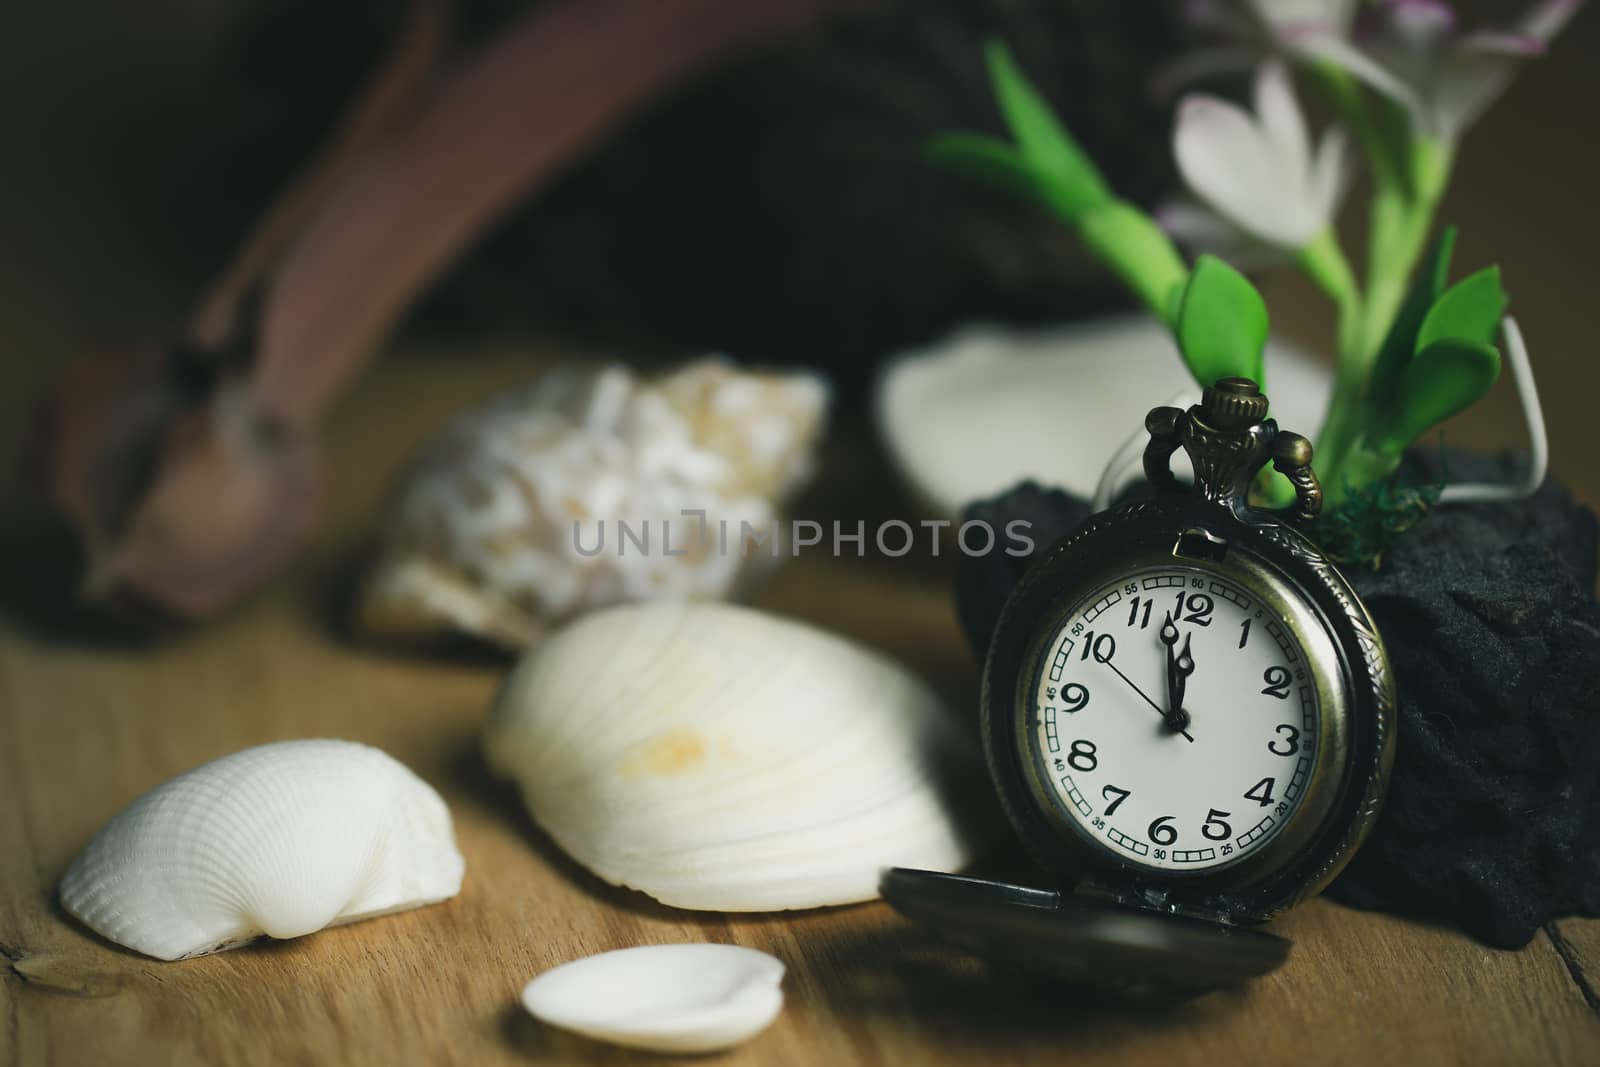 Vintage pocket watch and shell on wood background. The clock is near midnight. The concept of Happy New Year or resumption.